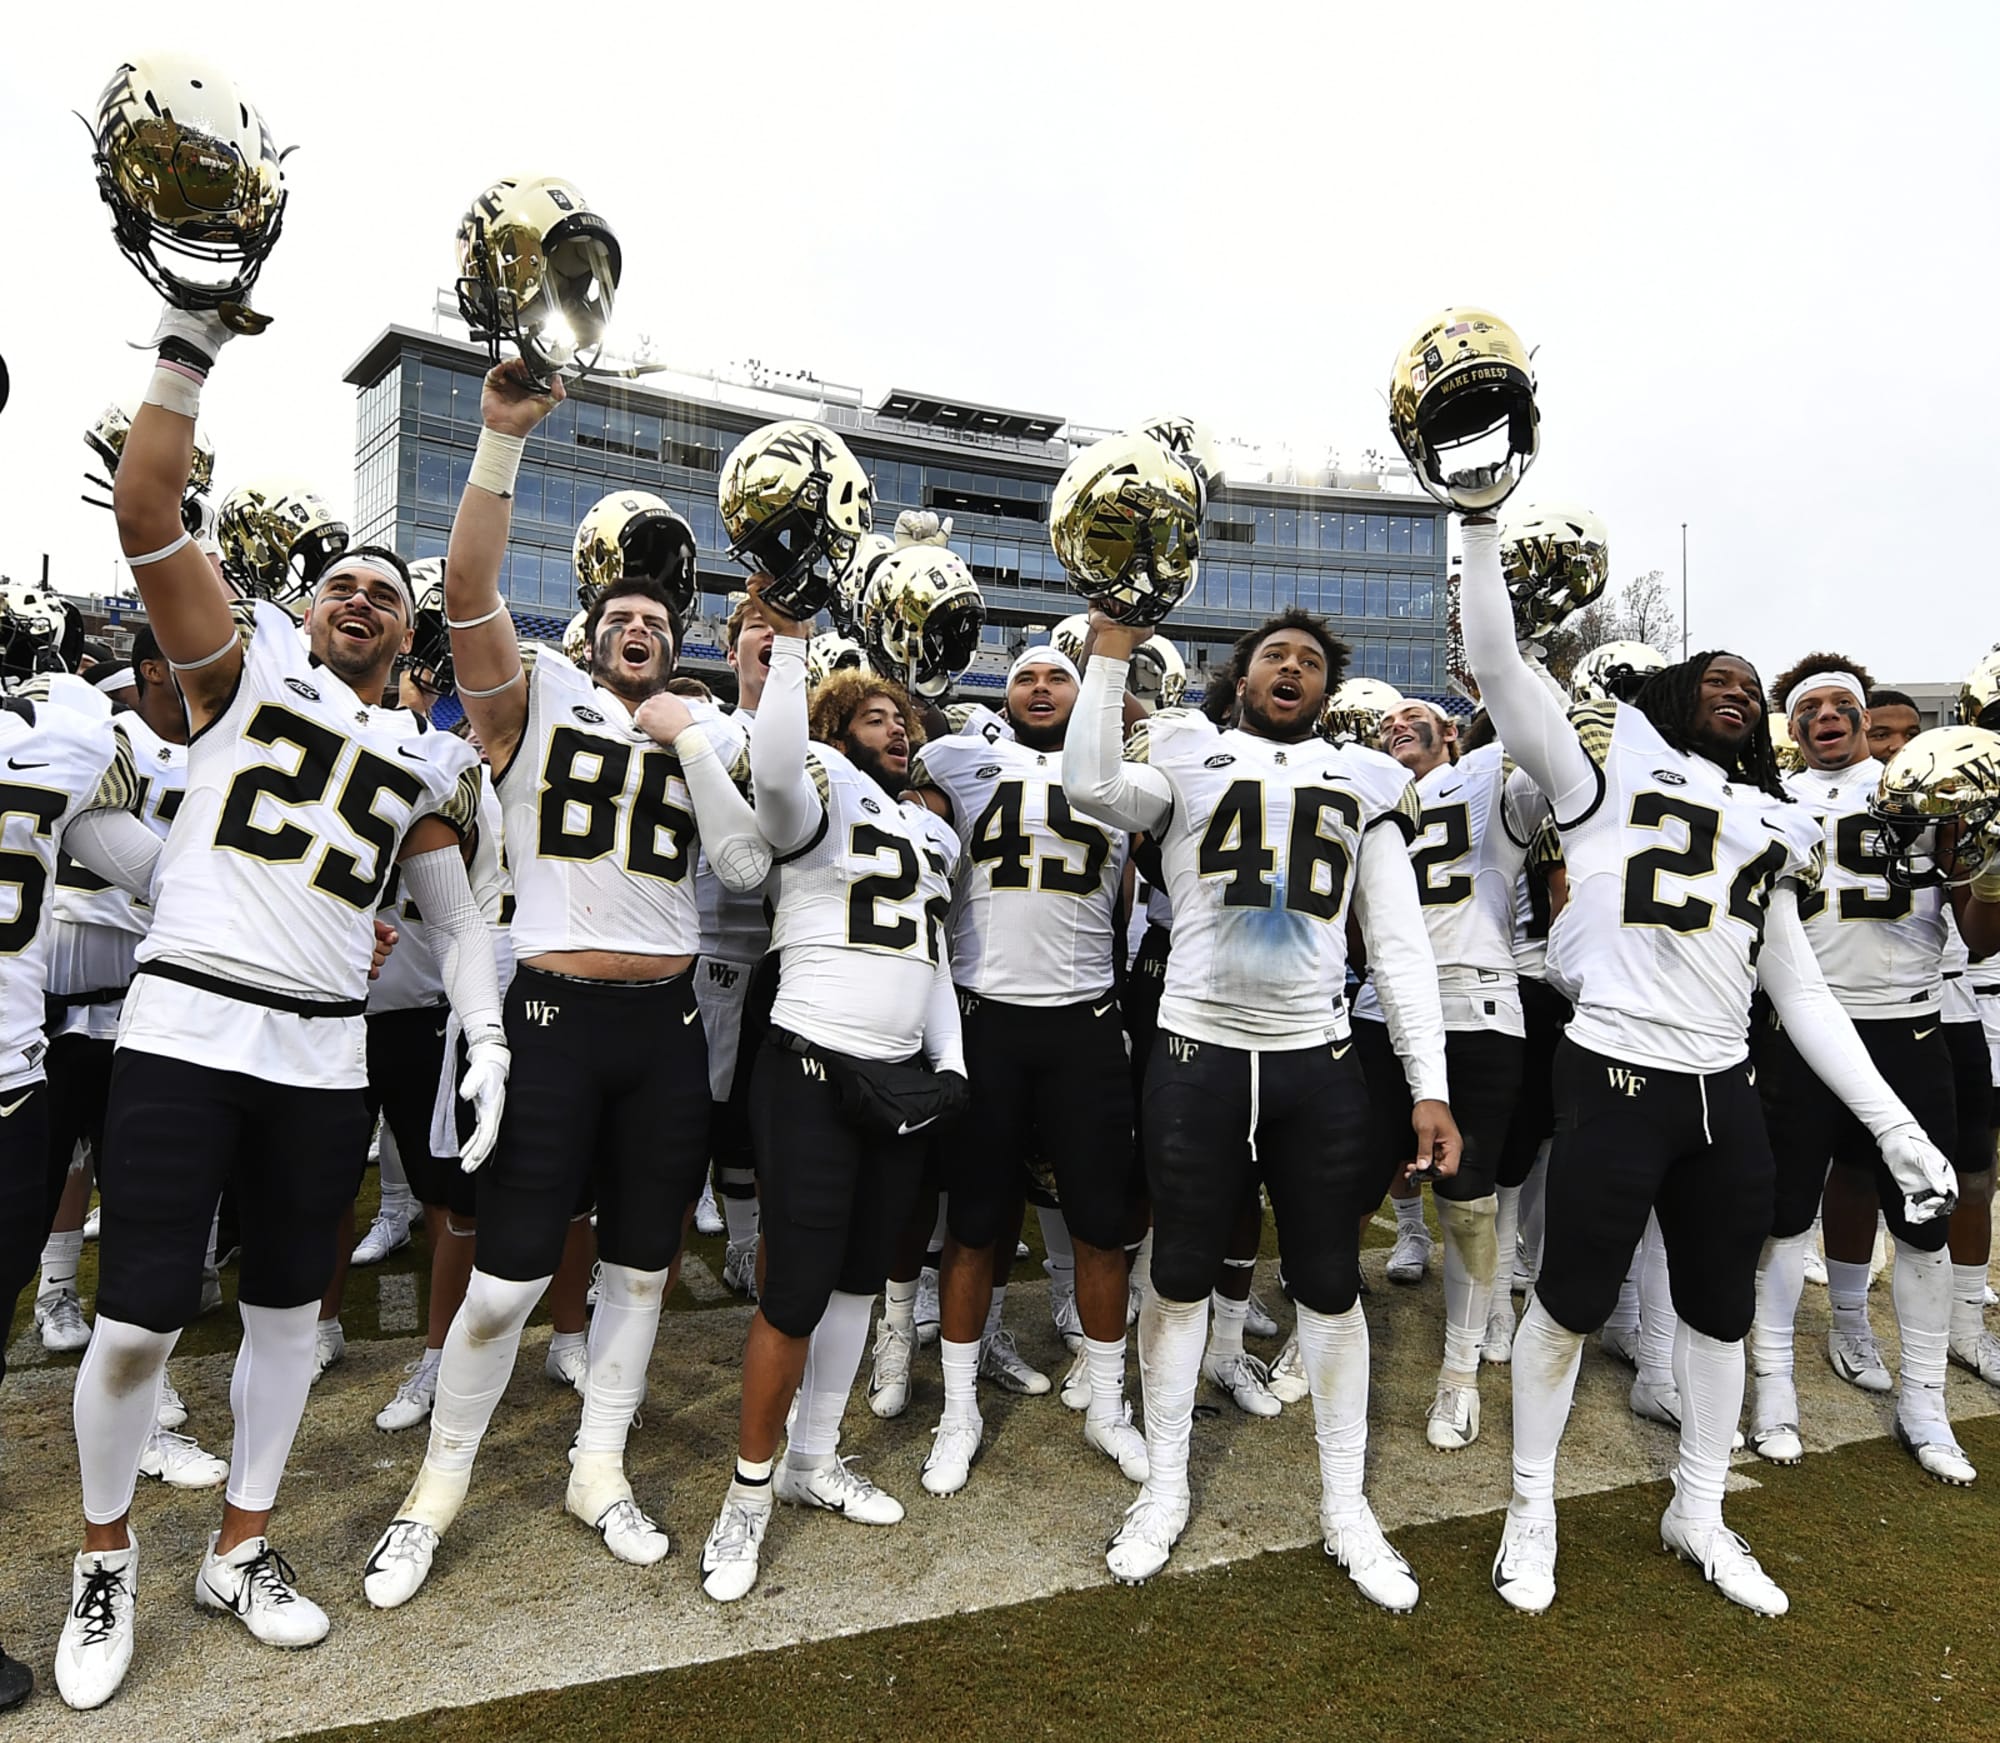 Wake Forest Football: Can Demon Deacons get to next level in 2019?